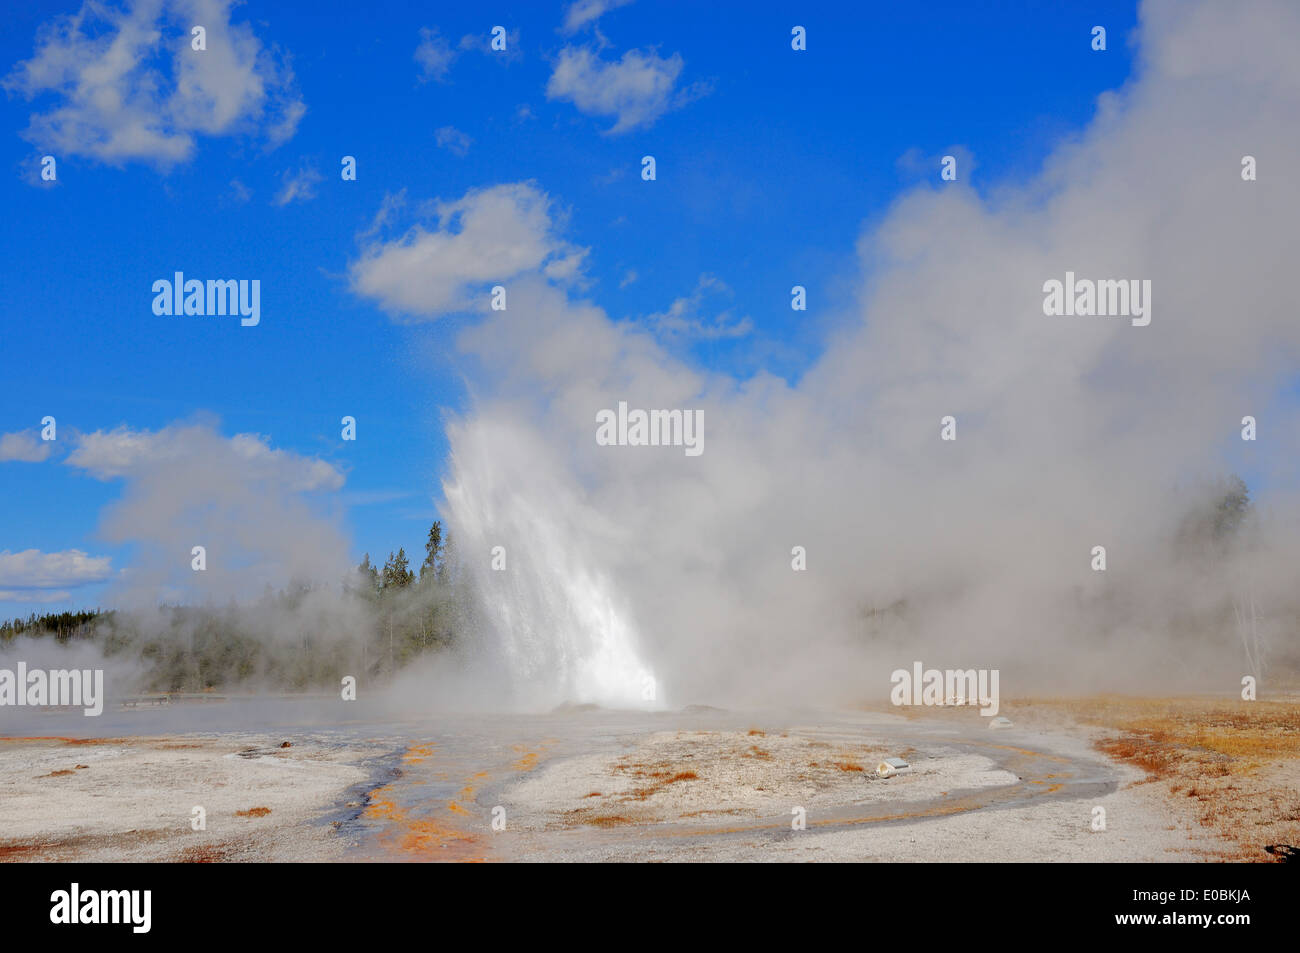 Daisy Geyser, Upper Geyser Basin, parc national de Yellowstone, Wyoming, USA Banque D'Images